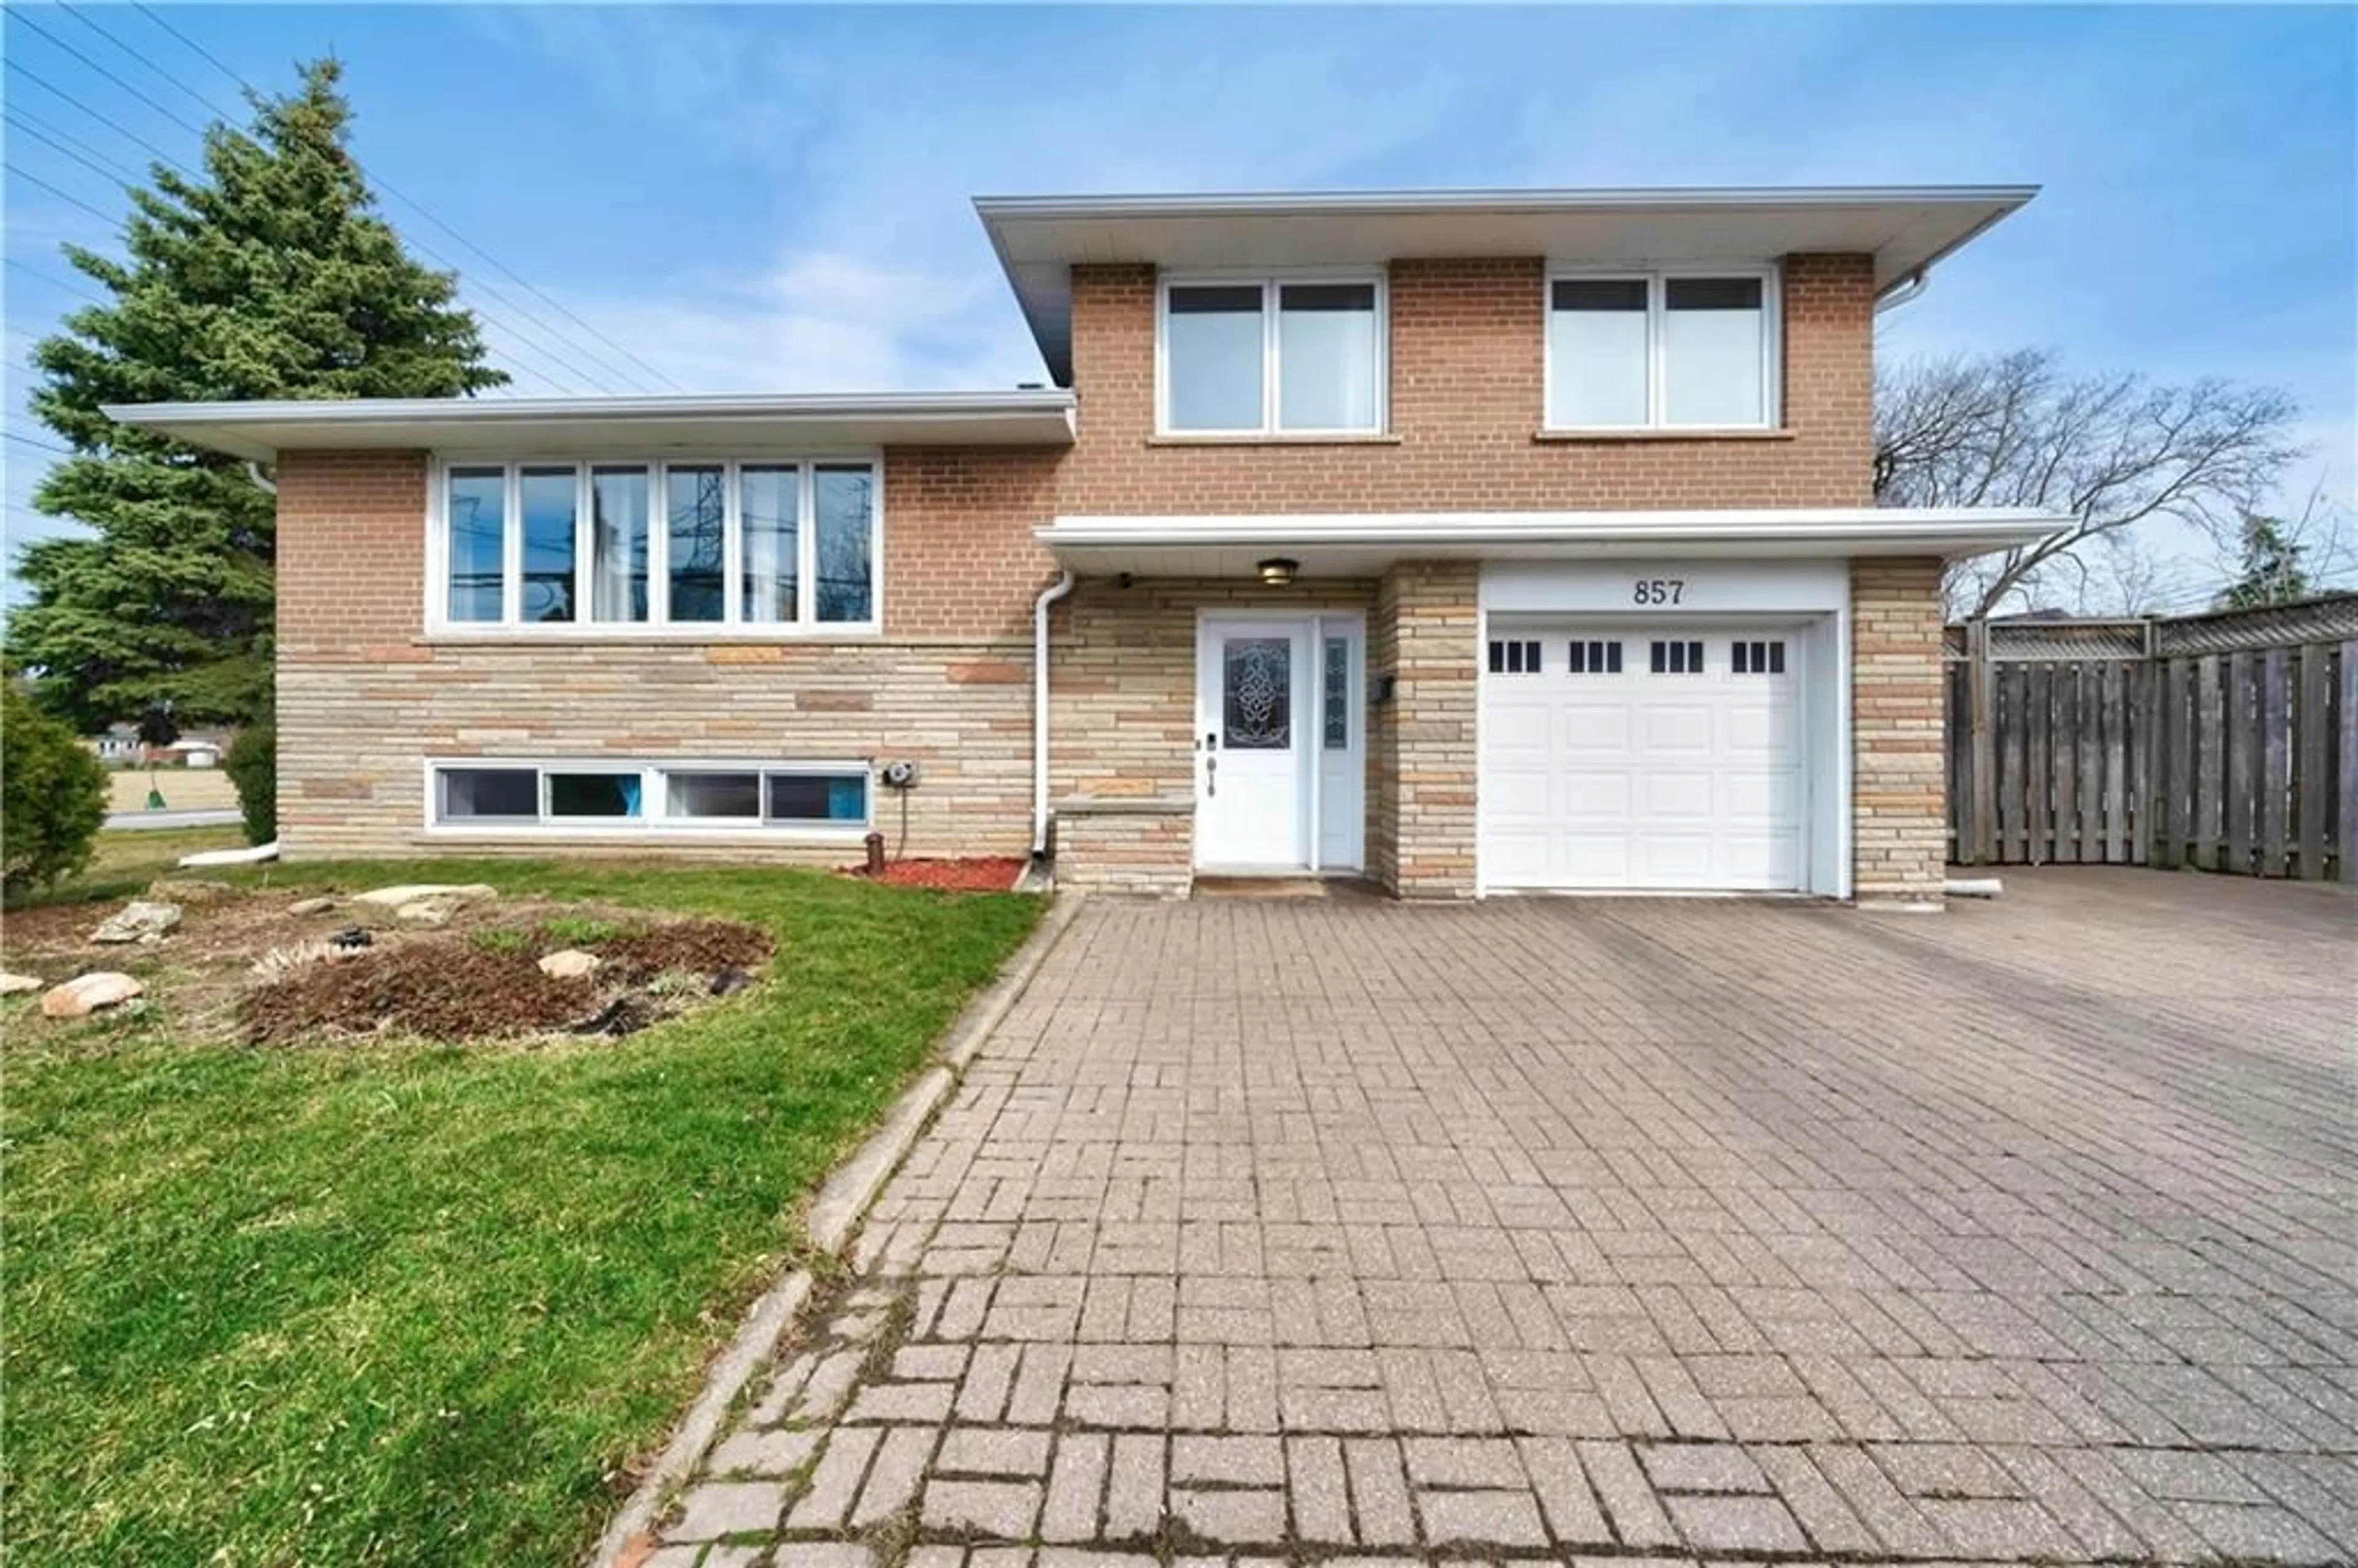 Home with brick exterior material for 857 Willowdale Ave, North York Ontario M2M 3B9